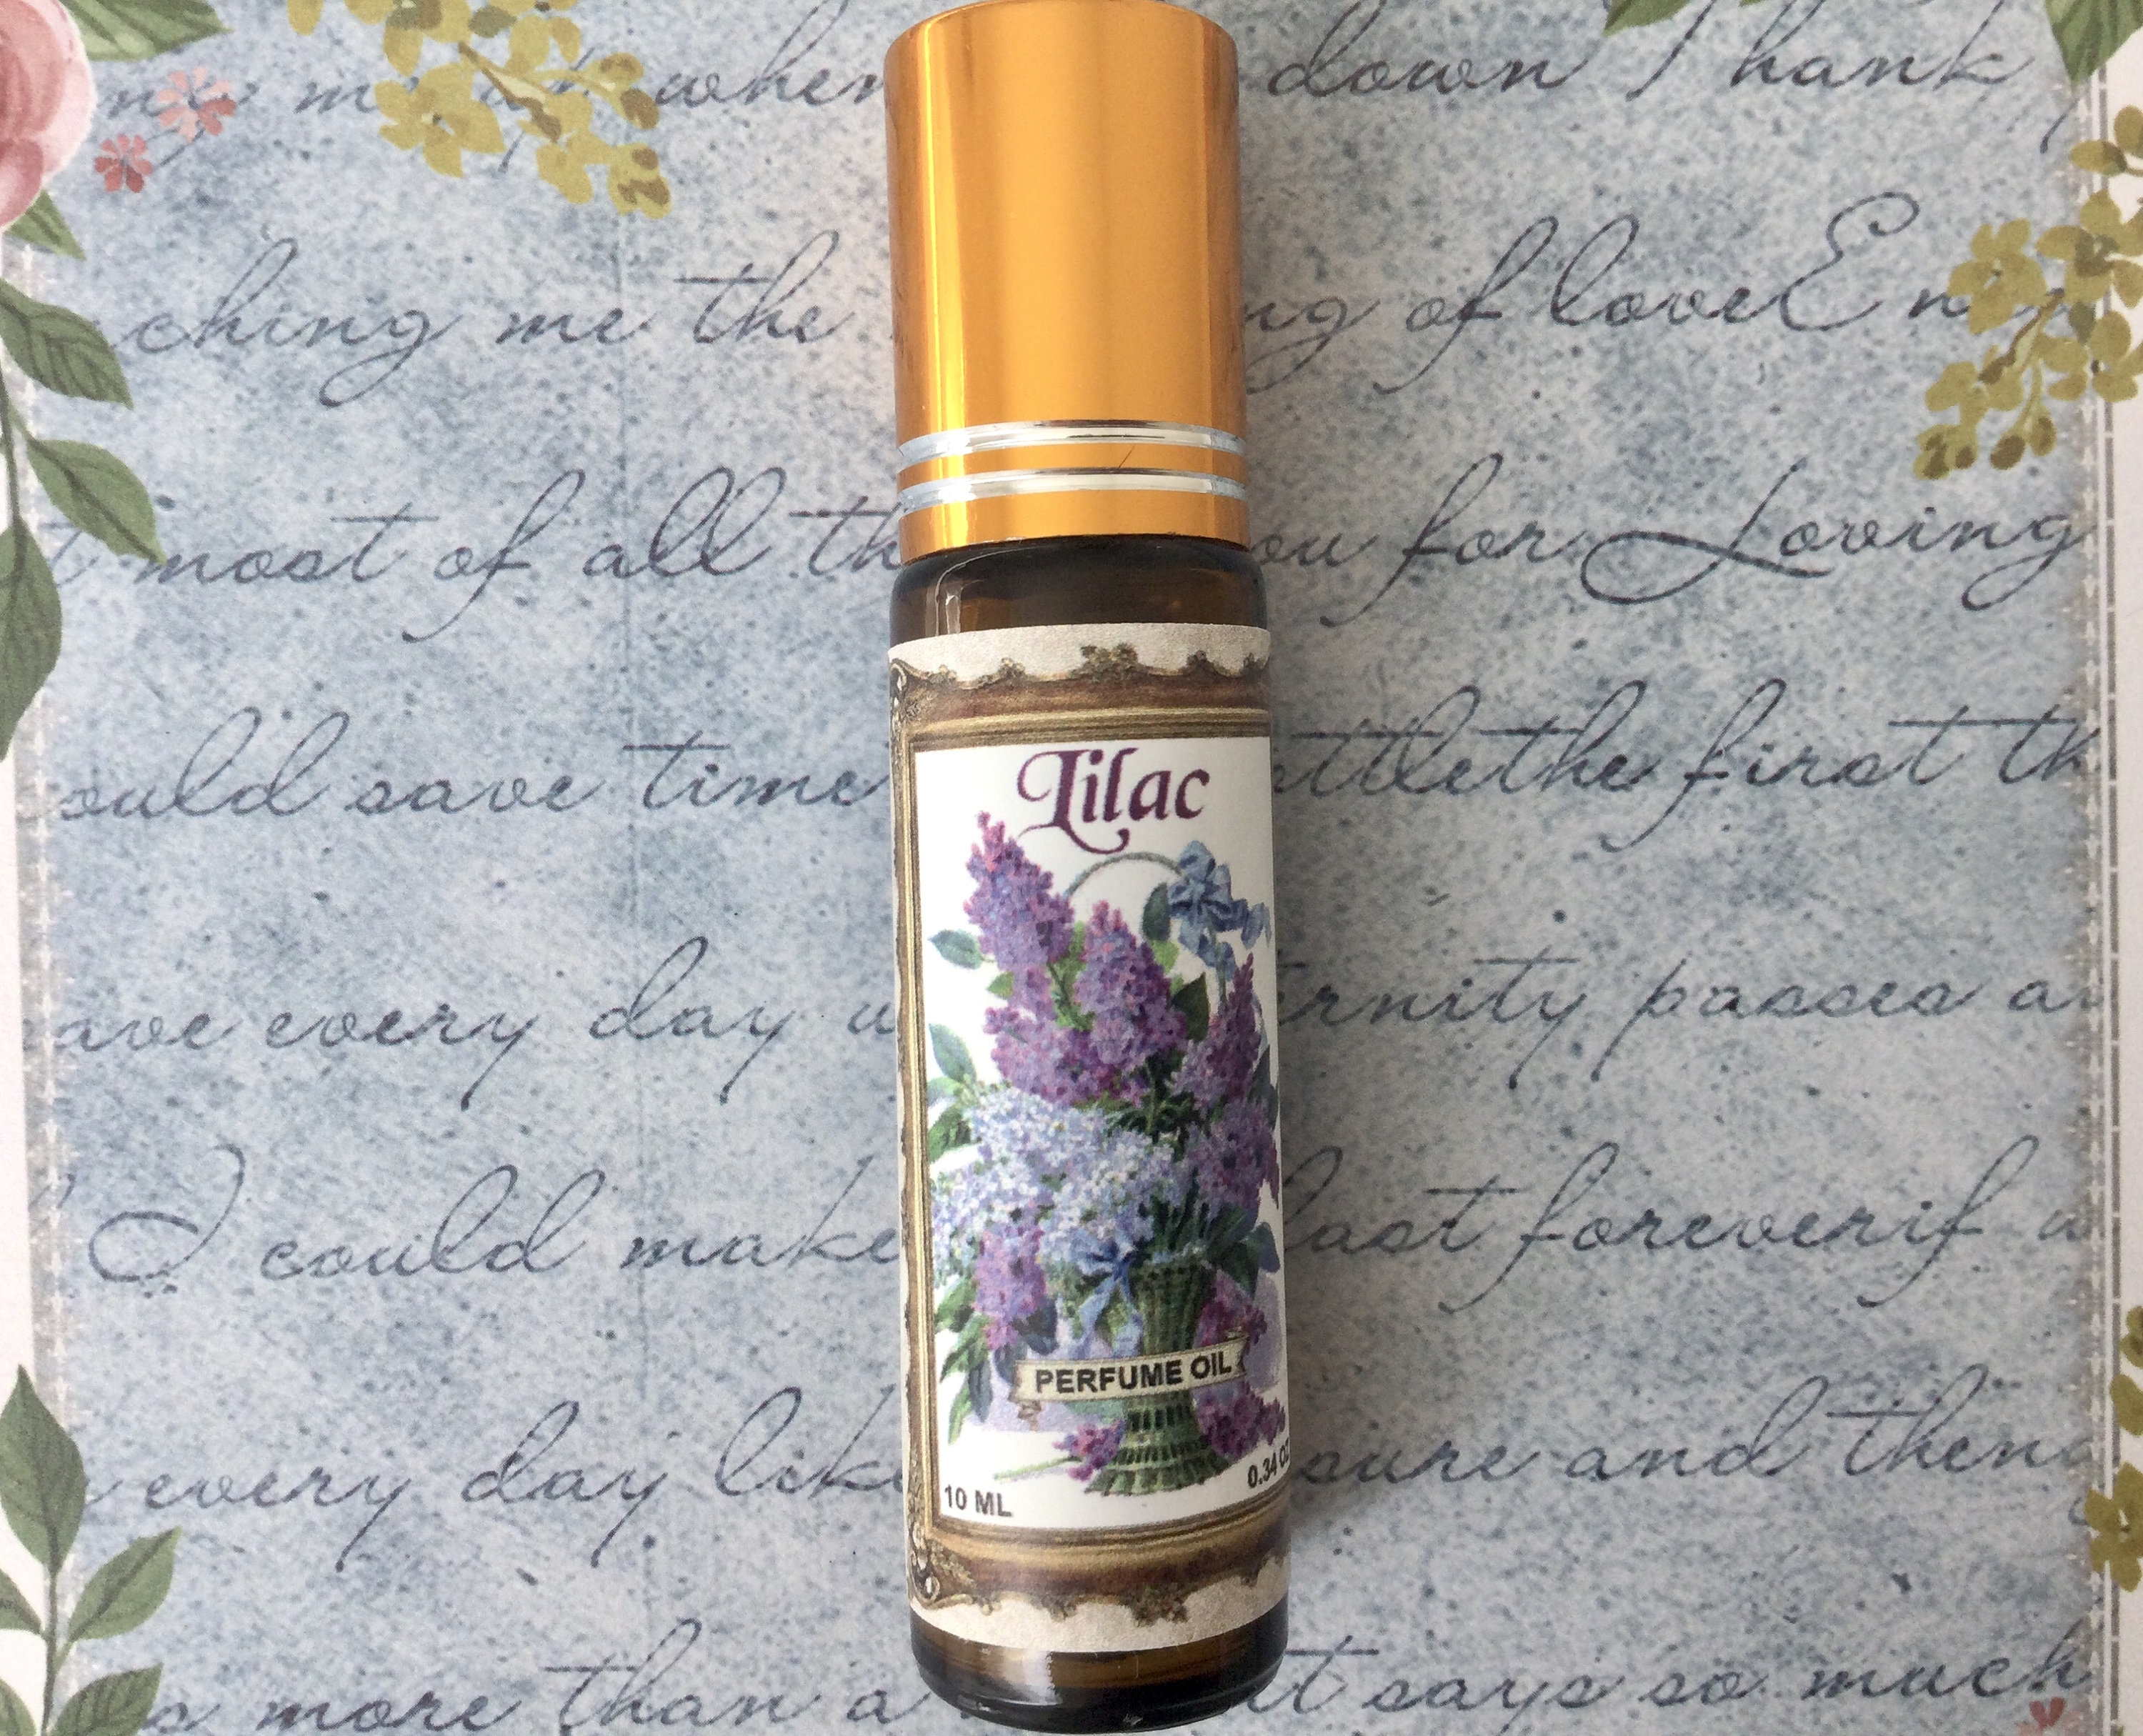 Oriental Lilac Perfume Floral Fragrance Vintage Handmade Perfume for Women  Christmas Gift for Mom, Girlfriend Valentine's Day Gift 